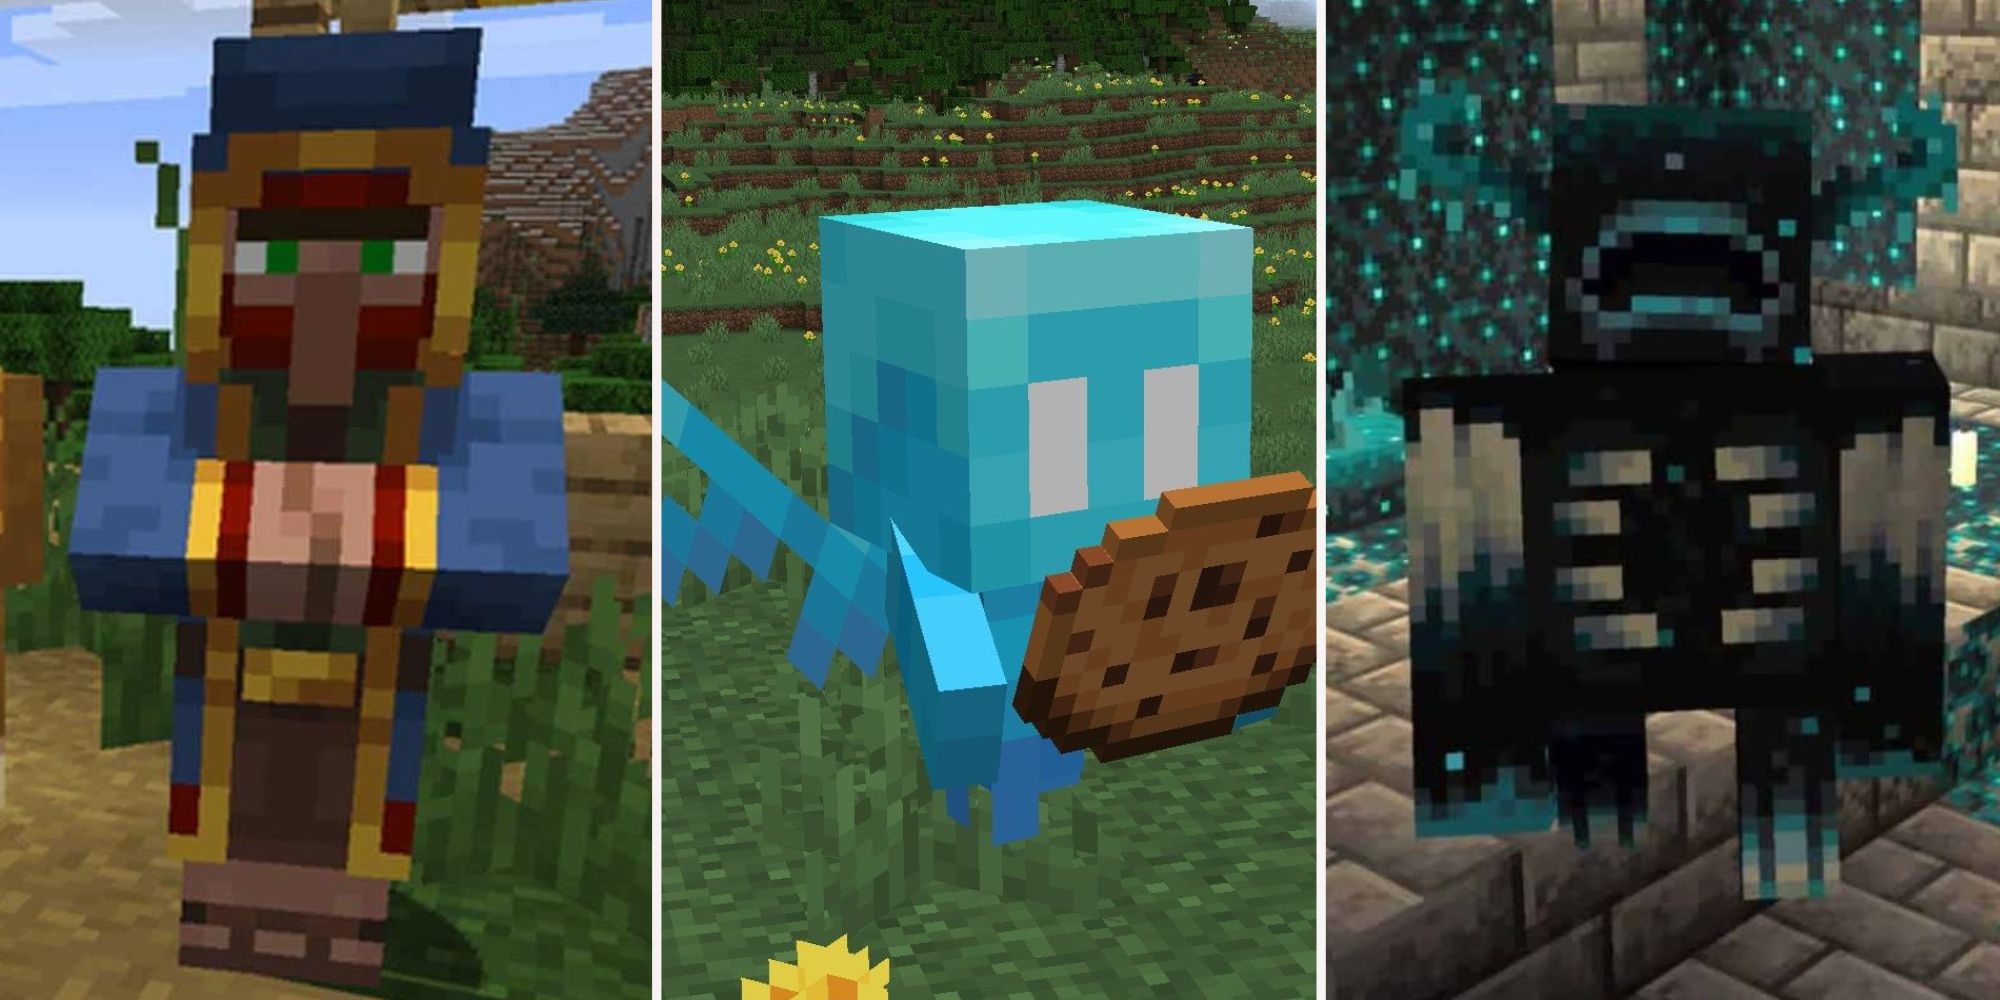 Minecraft Trader Allay and Warden in a split image side by side